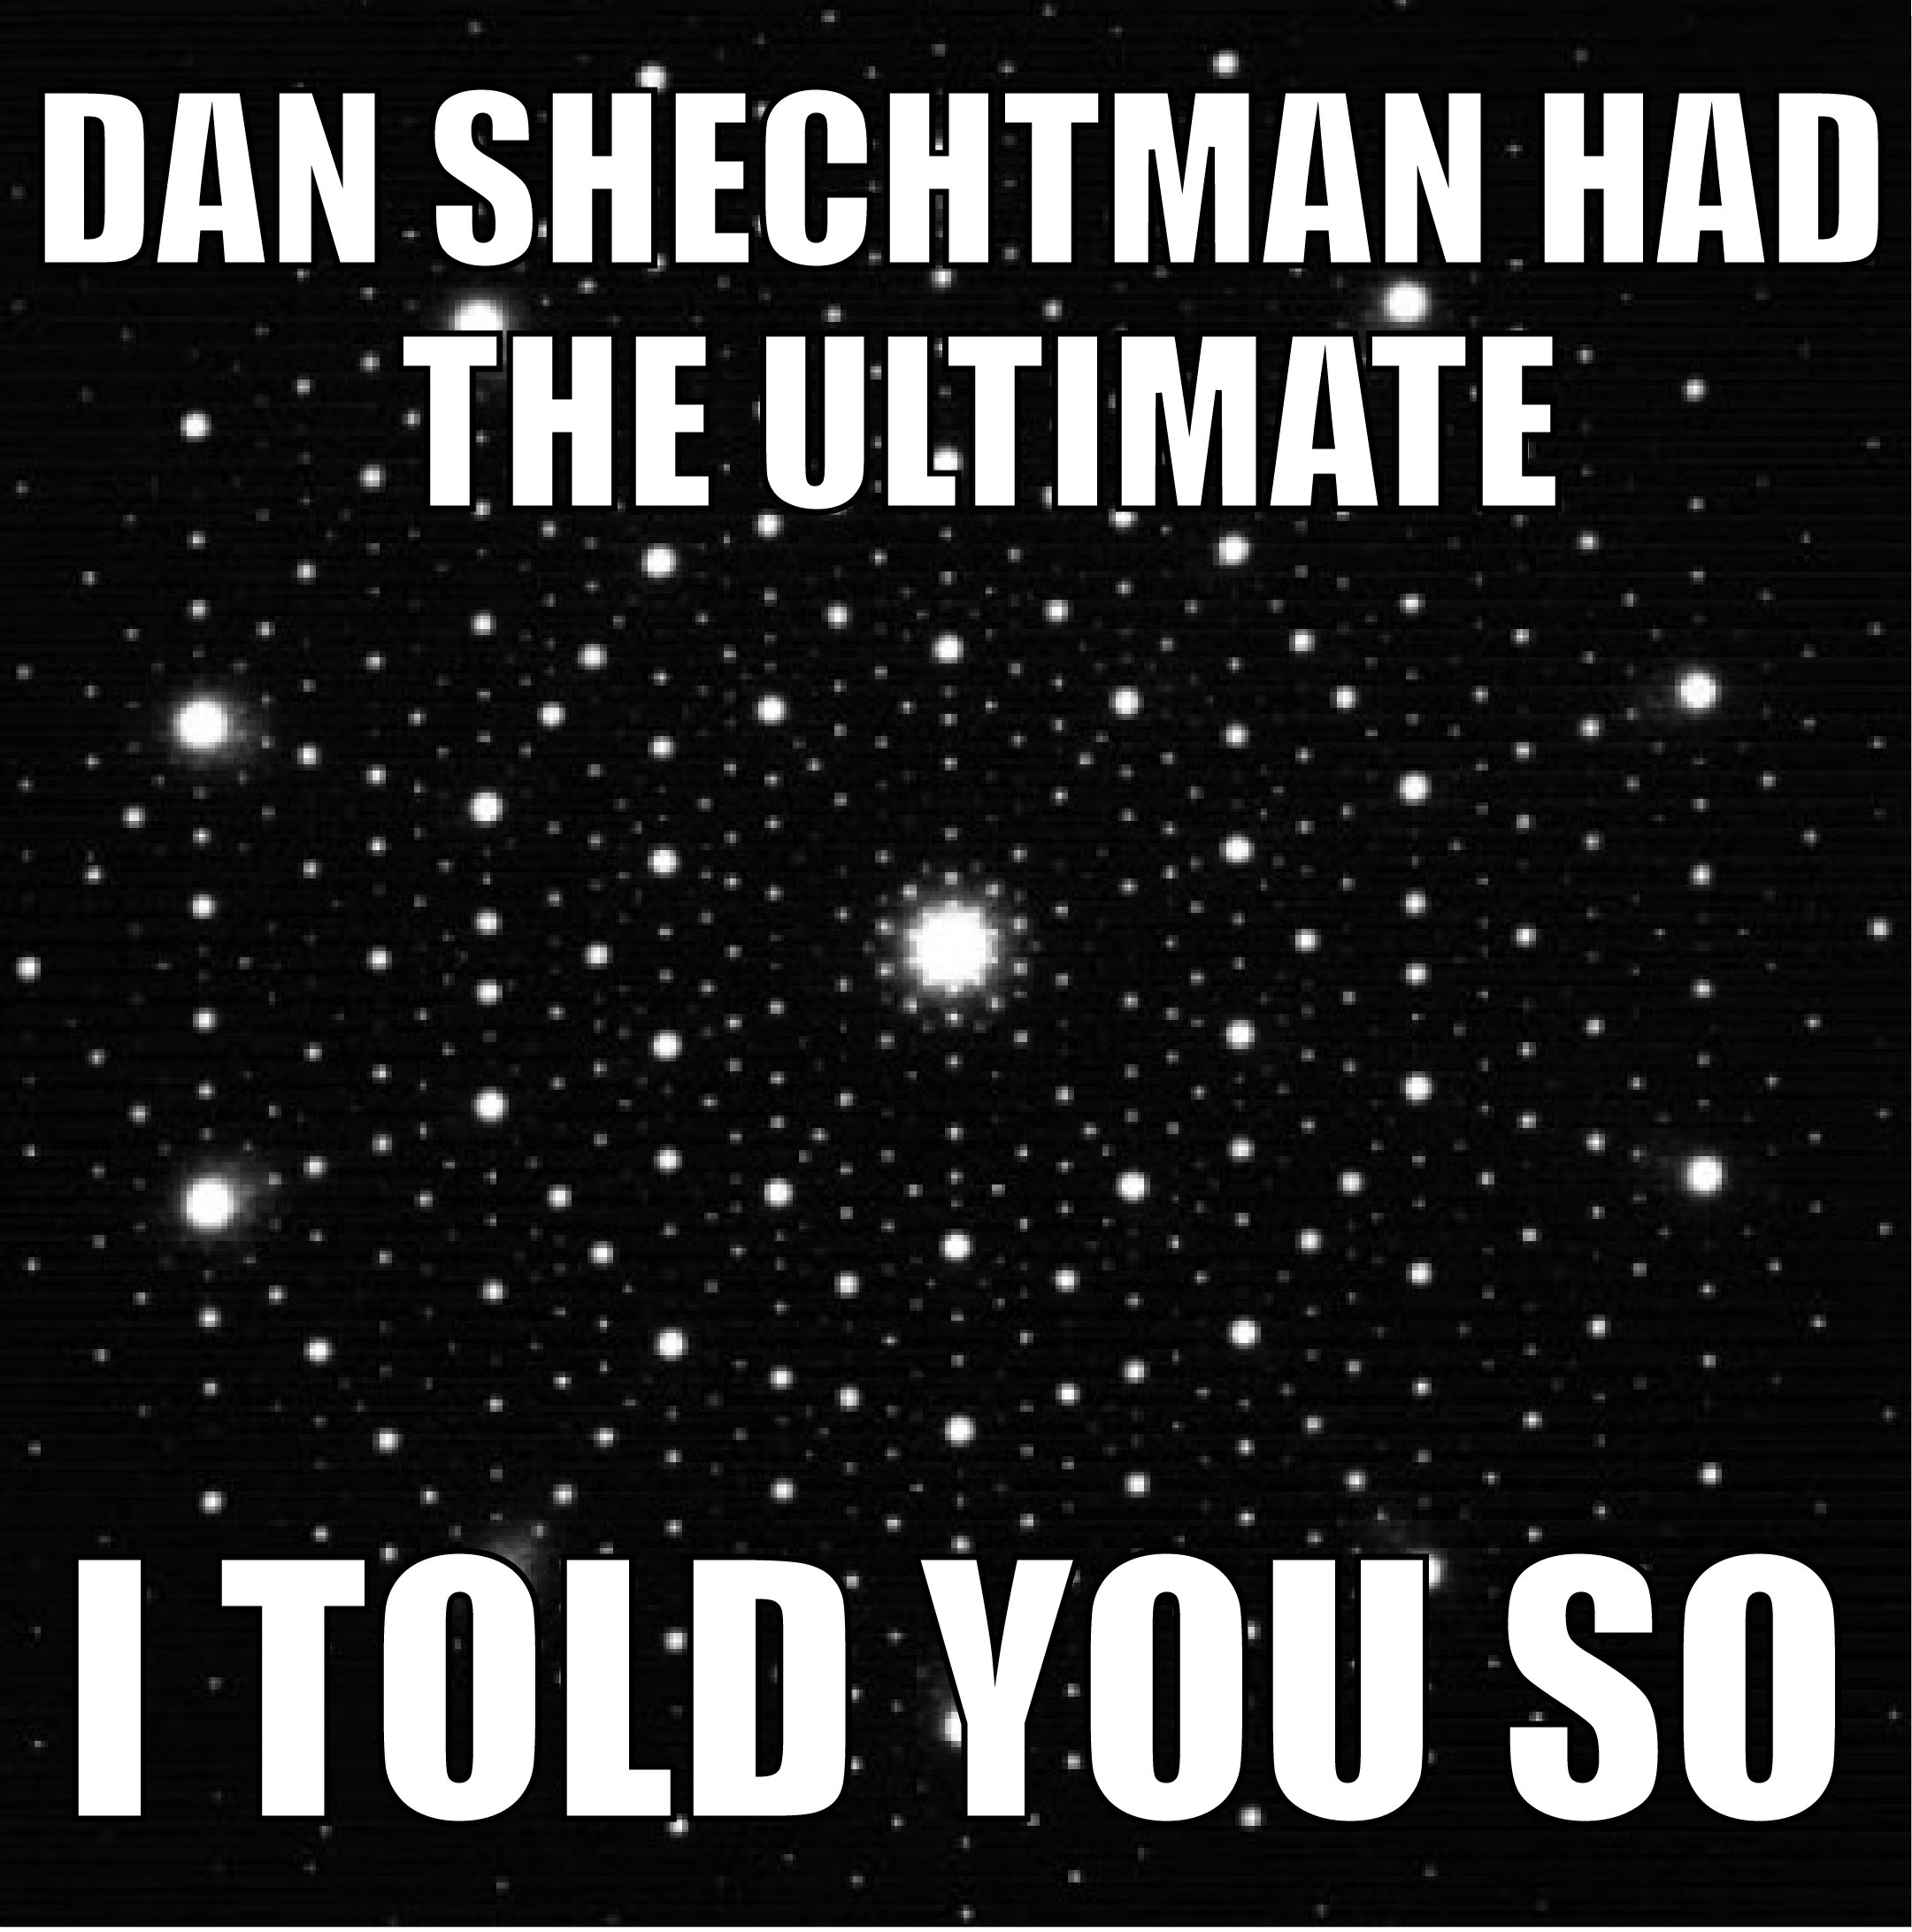 A pattern of white dots against a black background, with the dots extending outward from a large, central point. Text reads: "Dan Shechtman had the ultimate 'I told you so.'"